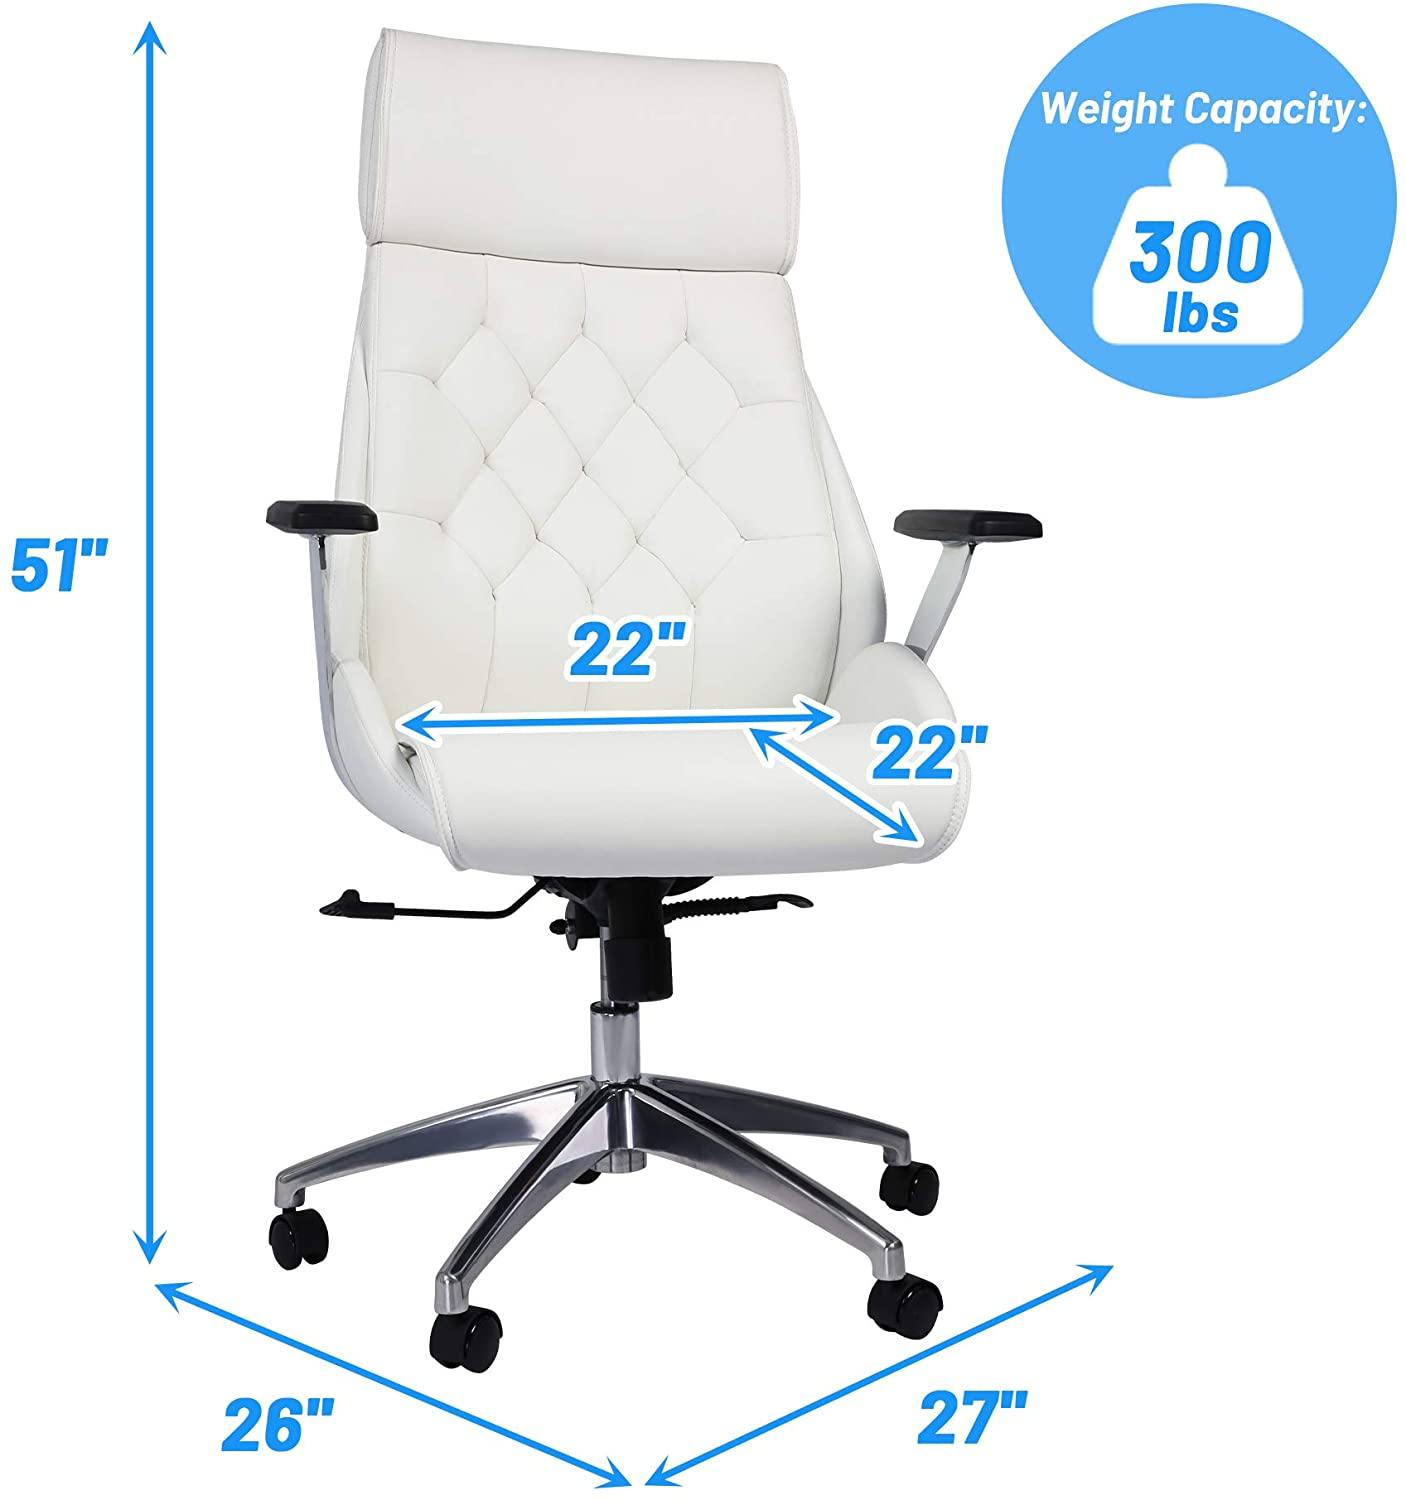 White Office Chair Ergonomic Leather High Back Heavy Duty Executive Chairs Adjustable Lock Position 360 Degree Swivel - Bosonshop